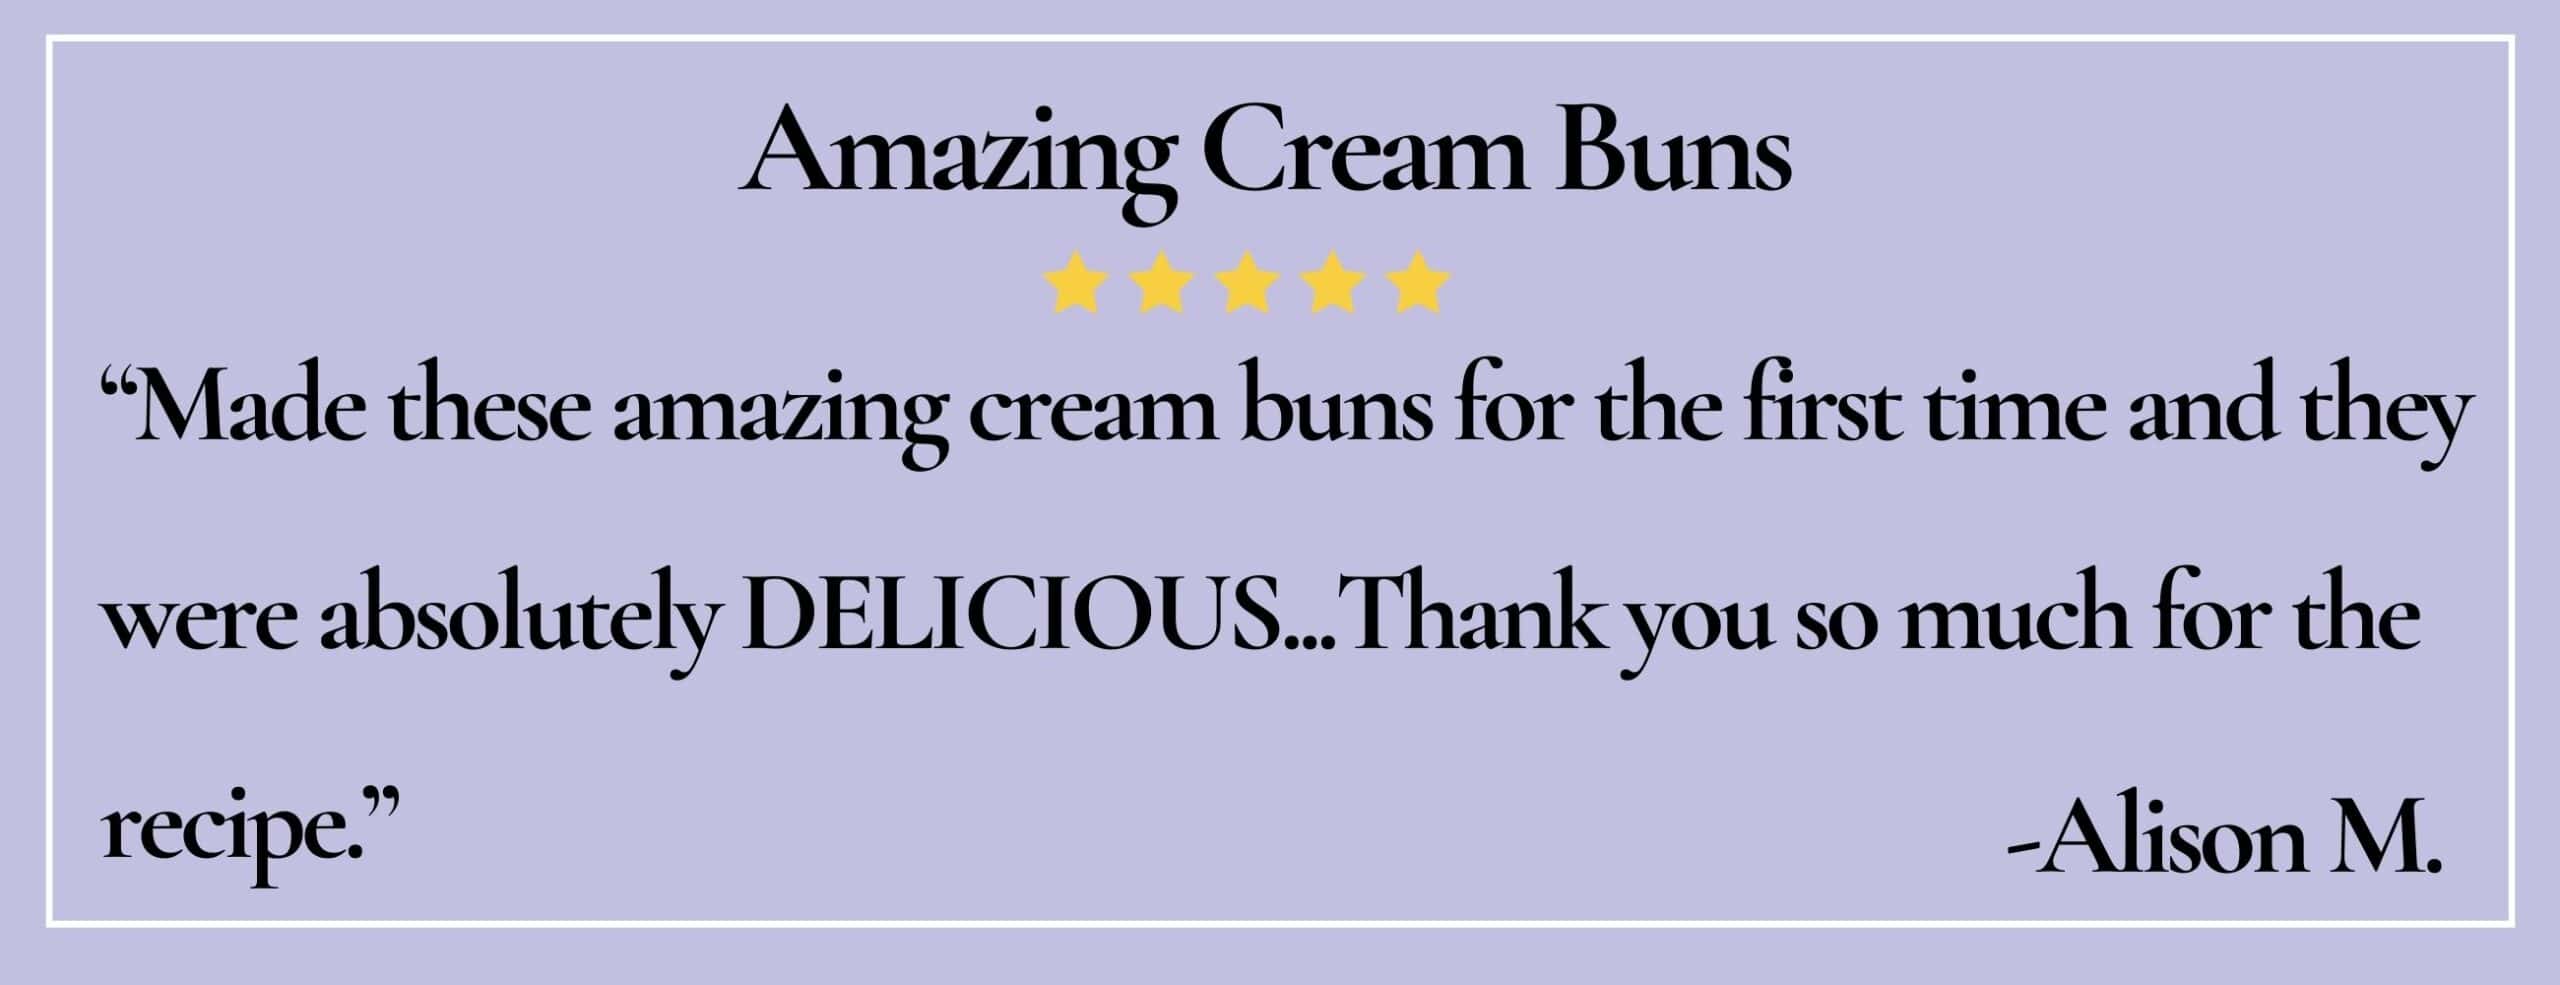 Text box with paraphrase: Made these amazing cream buns for the first time and they were absolutely DELICIOUS. -Alison M